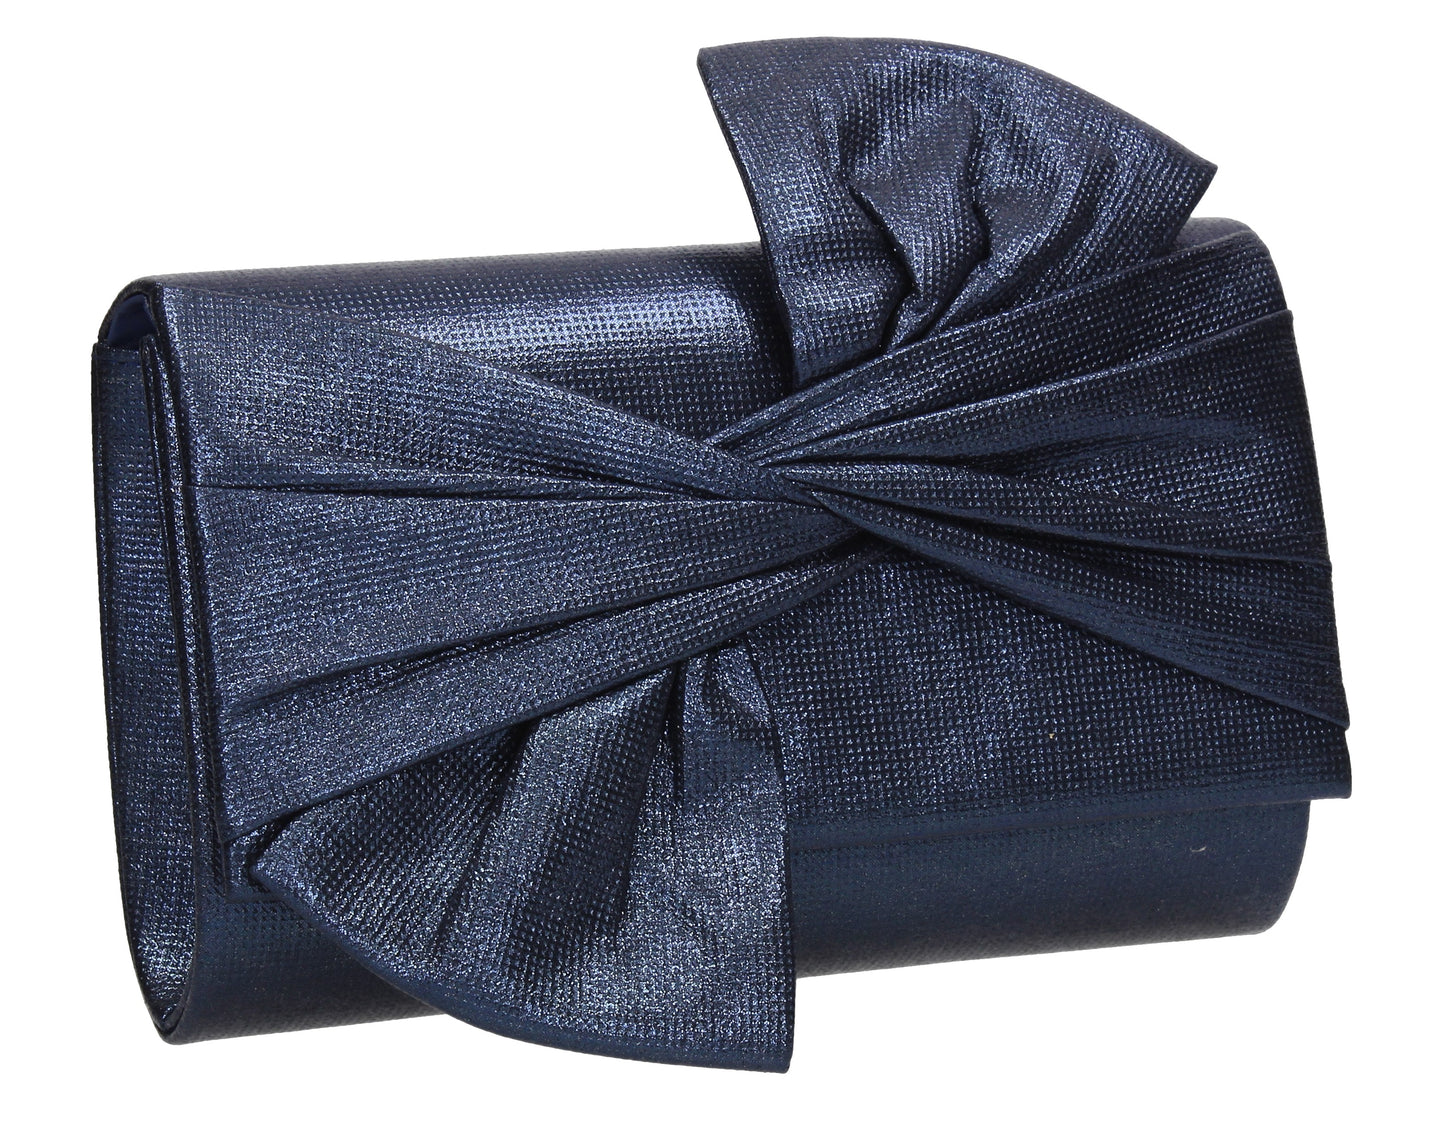 June Bow Style Clutch Bag Navy Blue